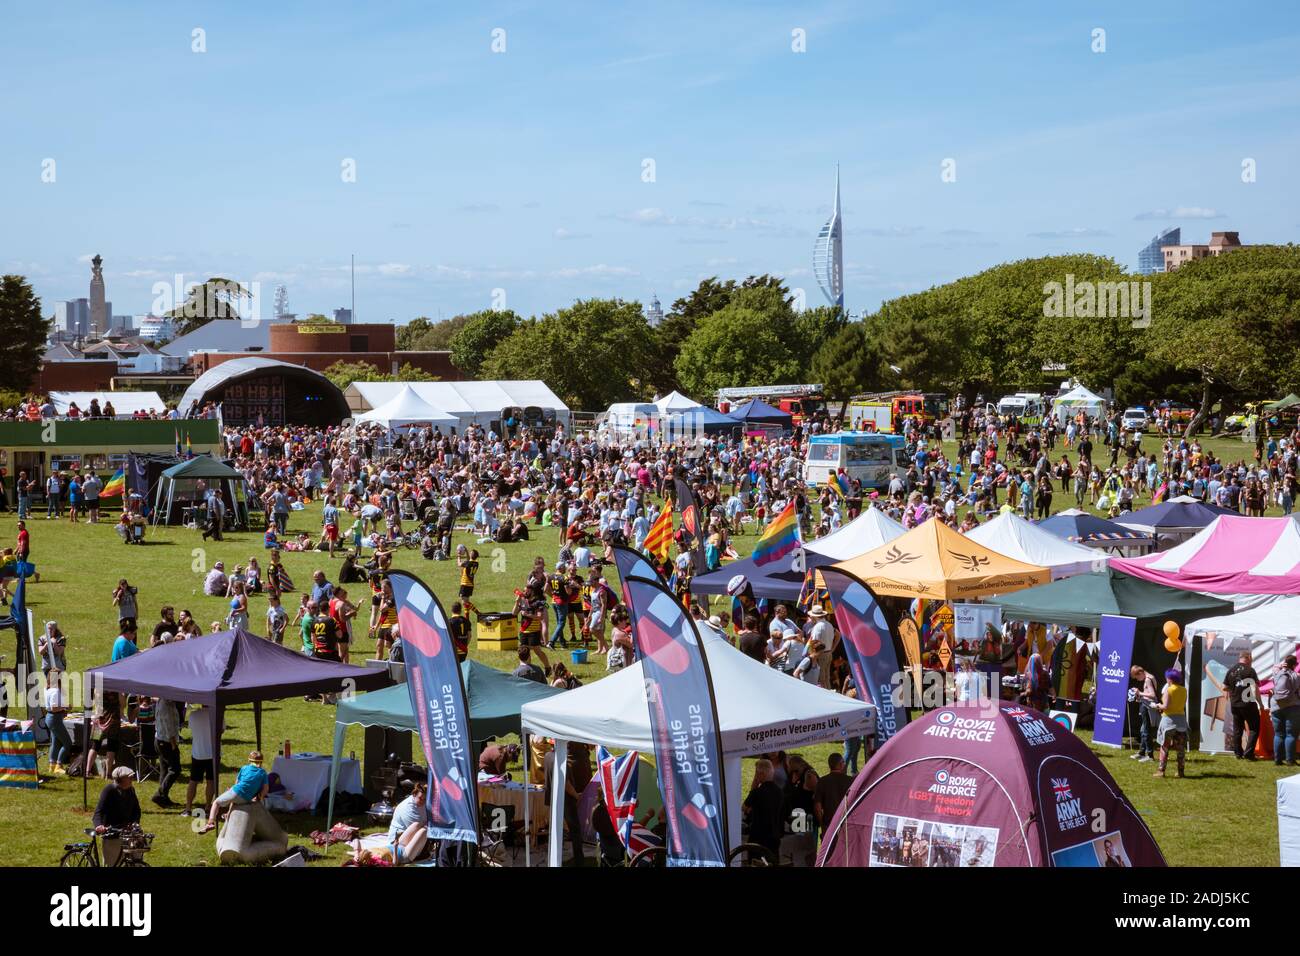 Crowds gather for Portsmouth Pride in Southsea to celebrate the LGBTQ+ community, with stalls and stands and stage performance Stock Photo